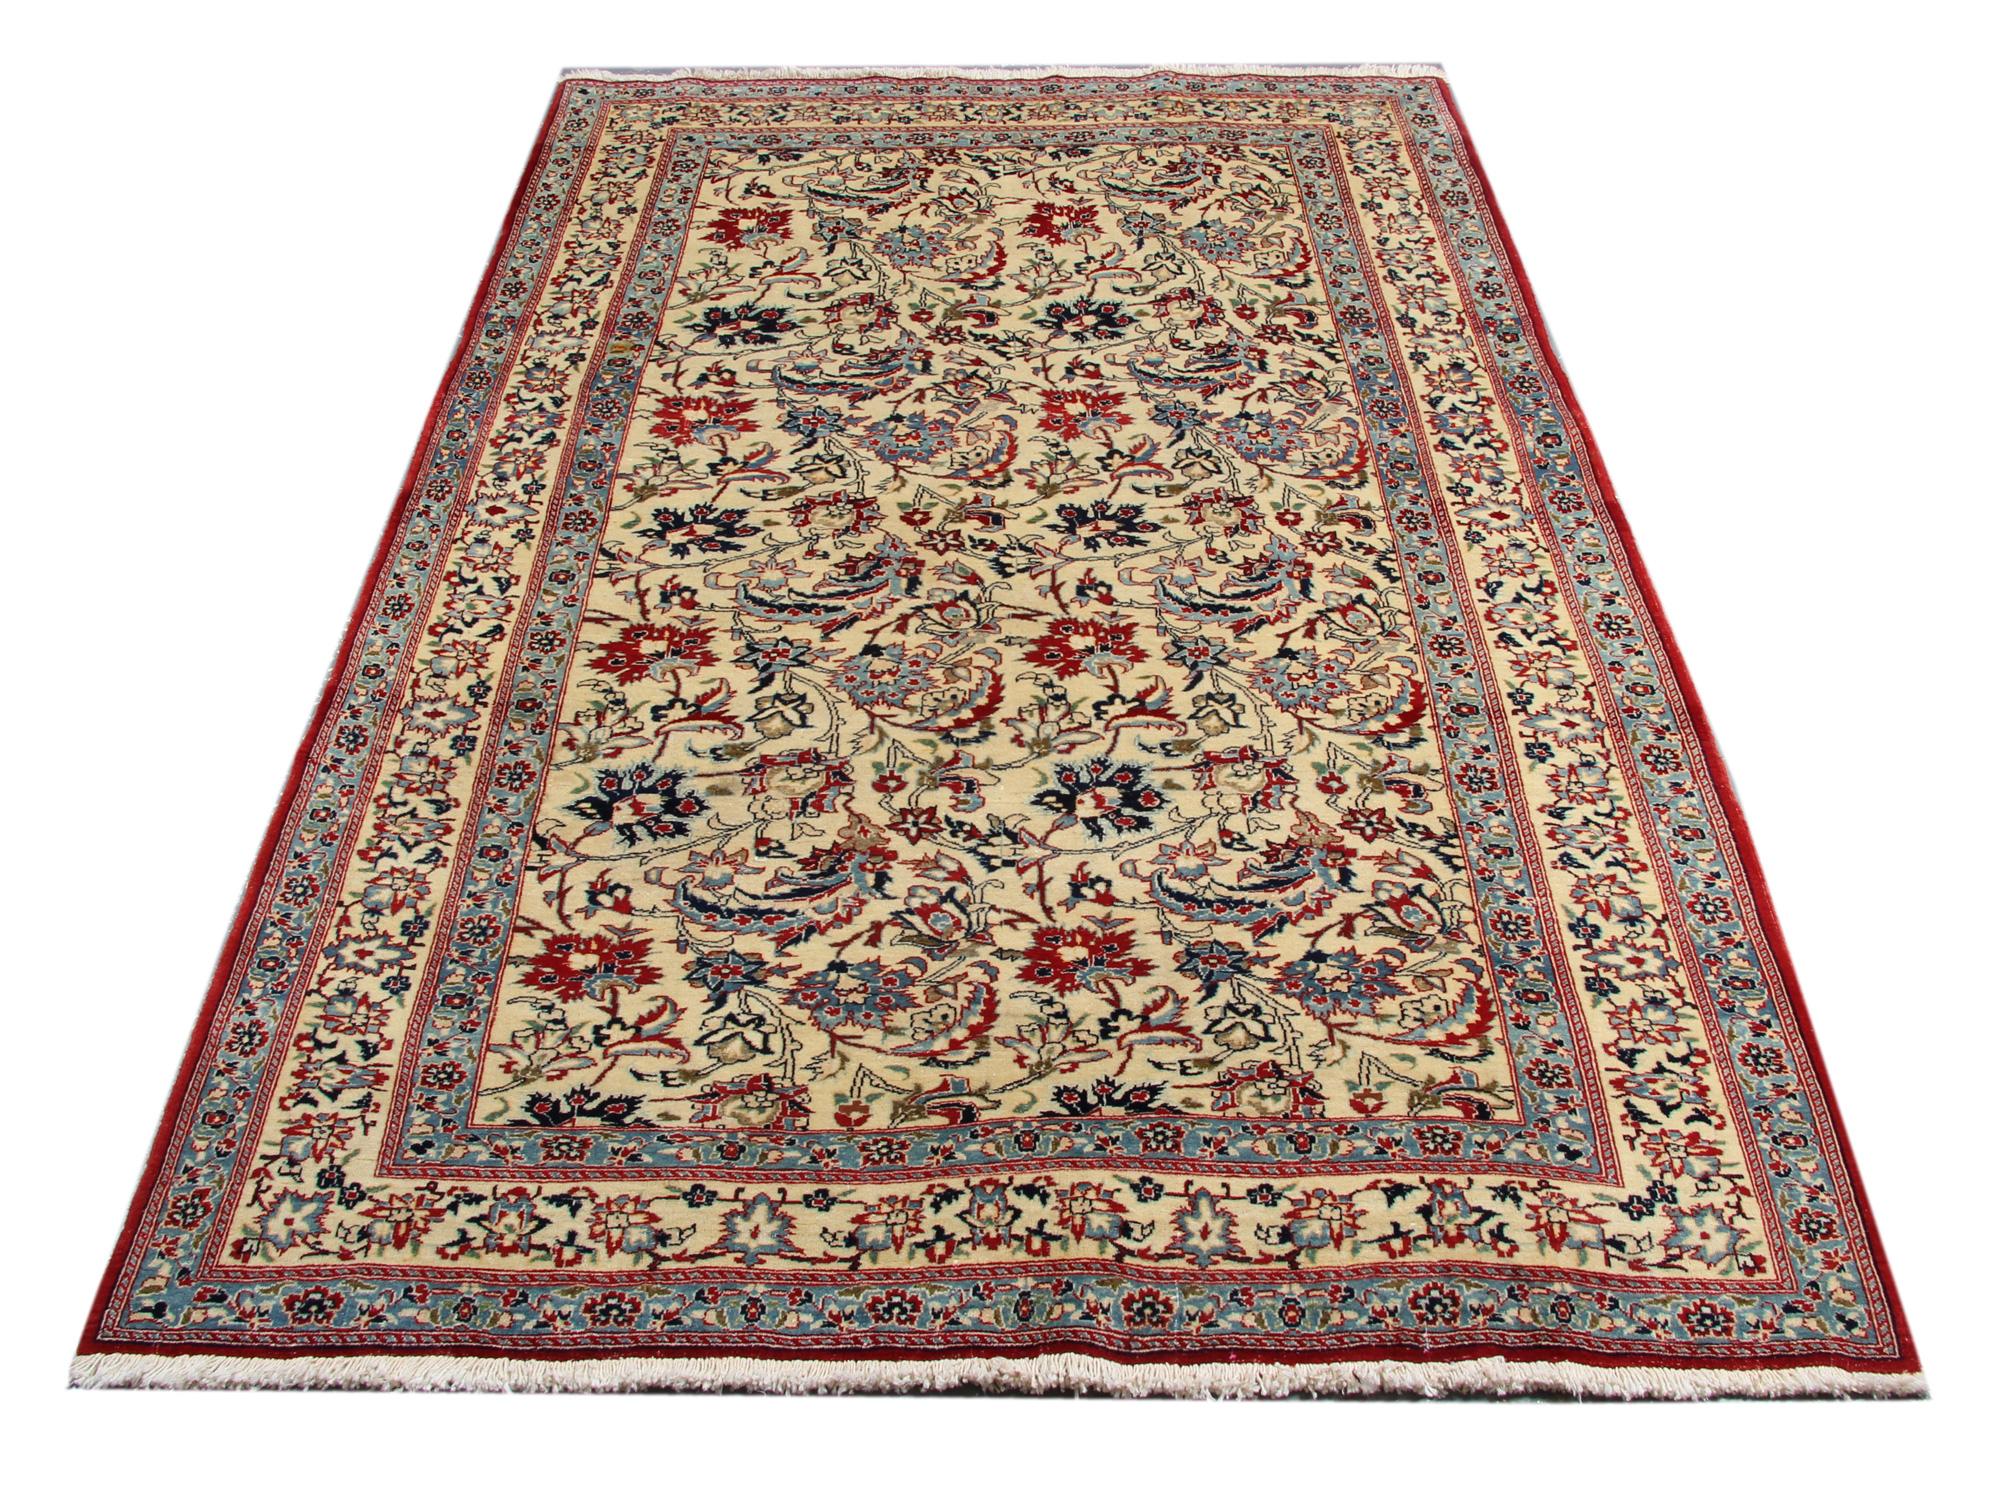 Antique Floral Rug Handwoven Carpet Cream Blue Wool Living Room Rug In Excellent Condition For Sale In Hampshire, GB